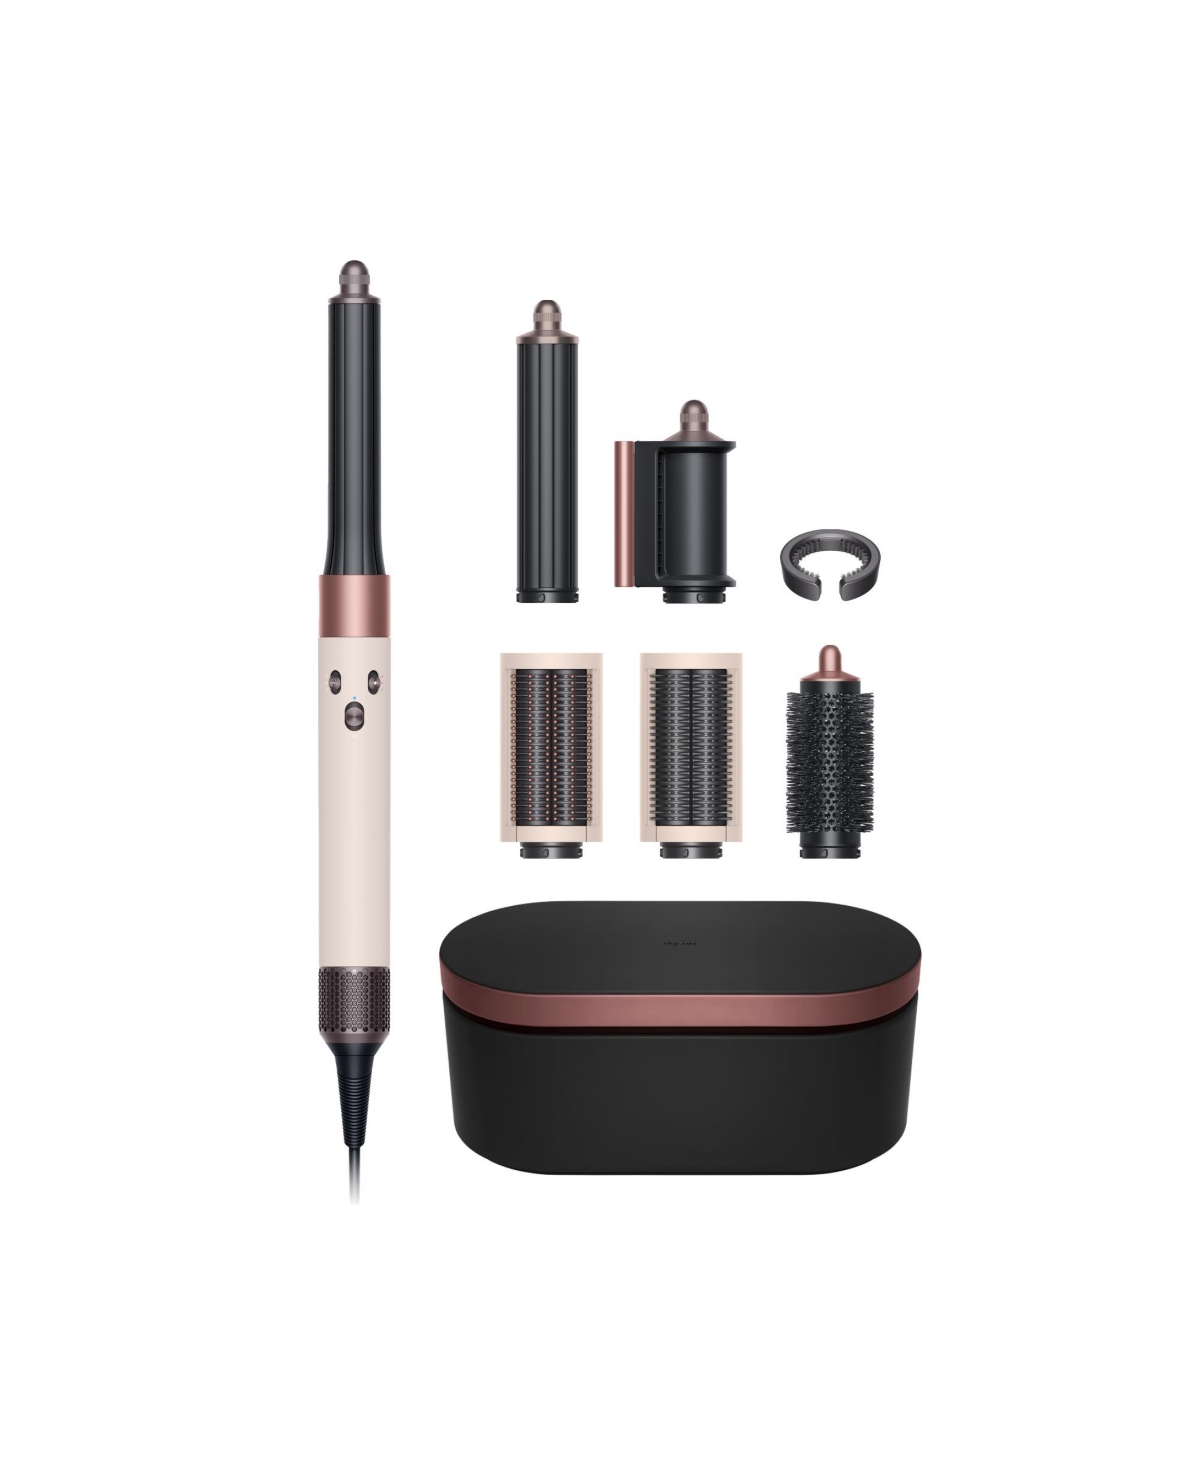 Airwrap Multi-Styler Complete Long - Limited Edition Ceramic Pink/Rose Gold - Ceramic pink/rose gold